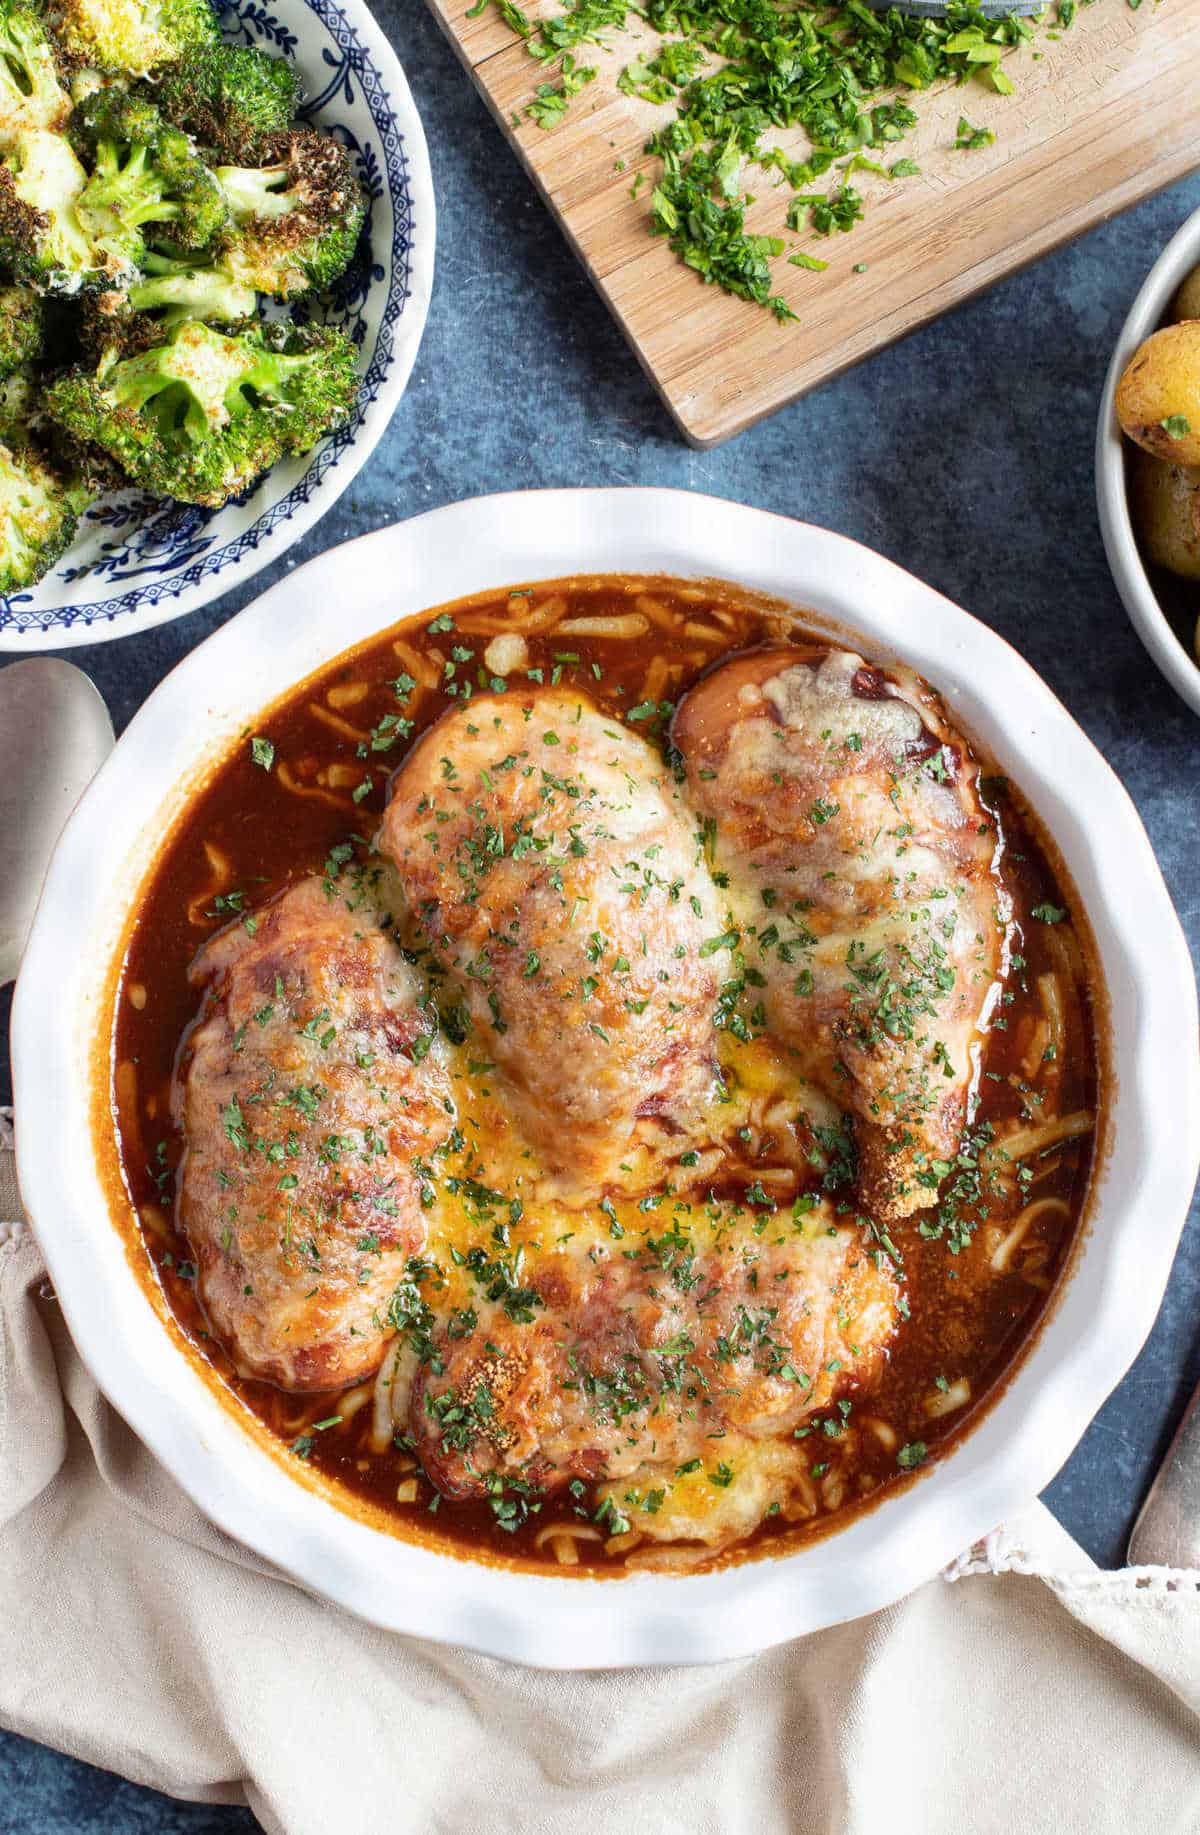 Slow cooker hunters chicken in a serving dish.